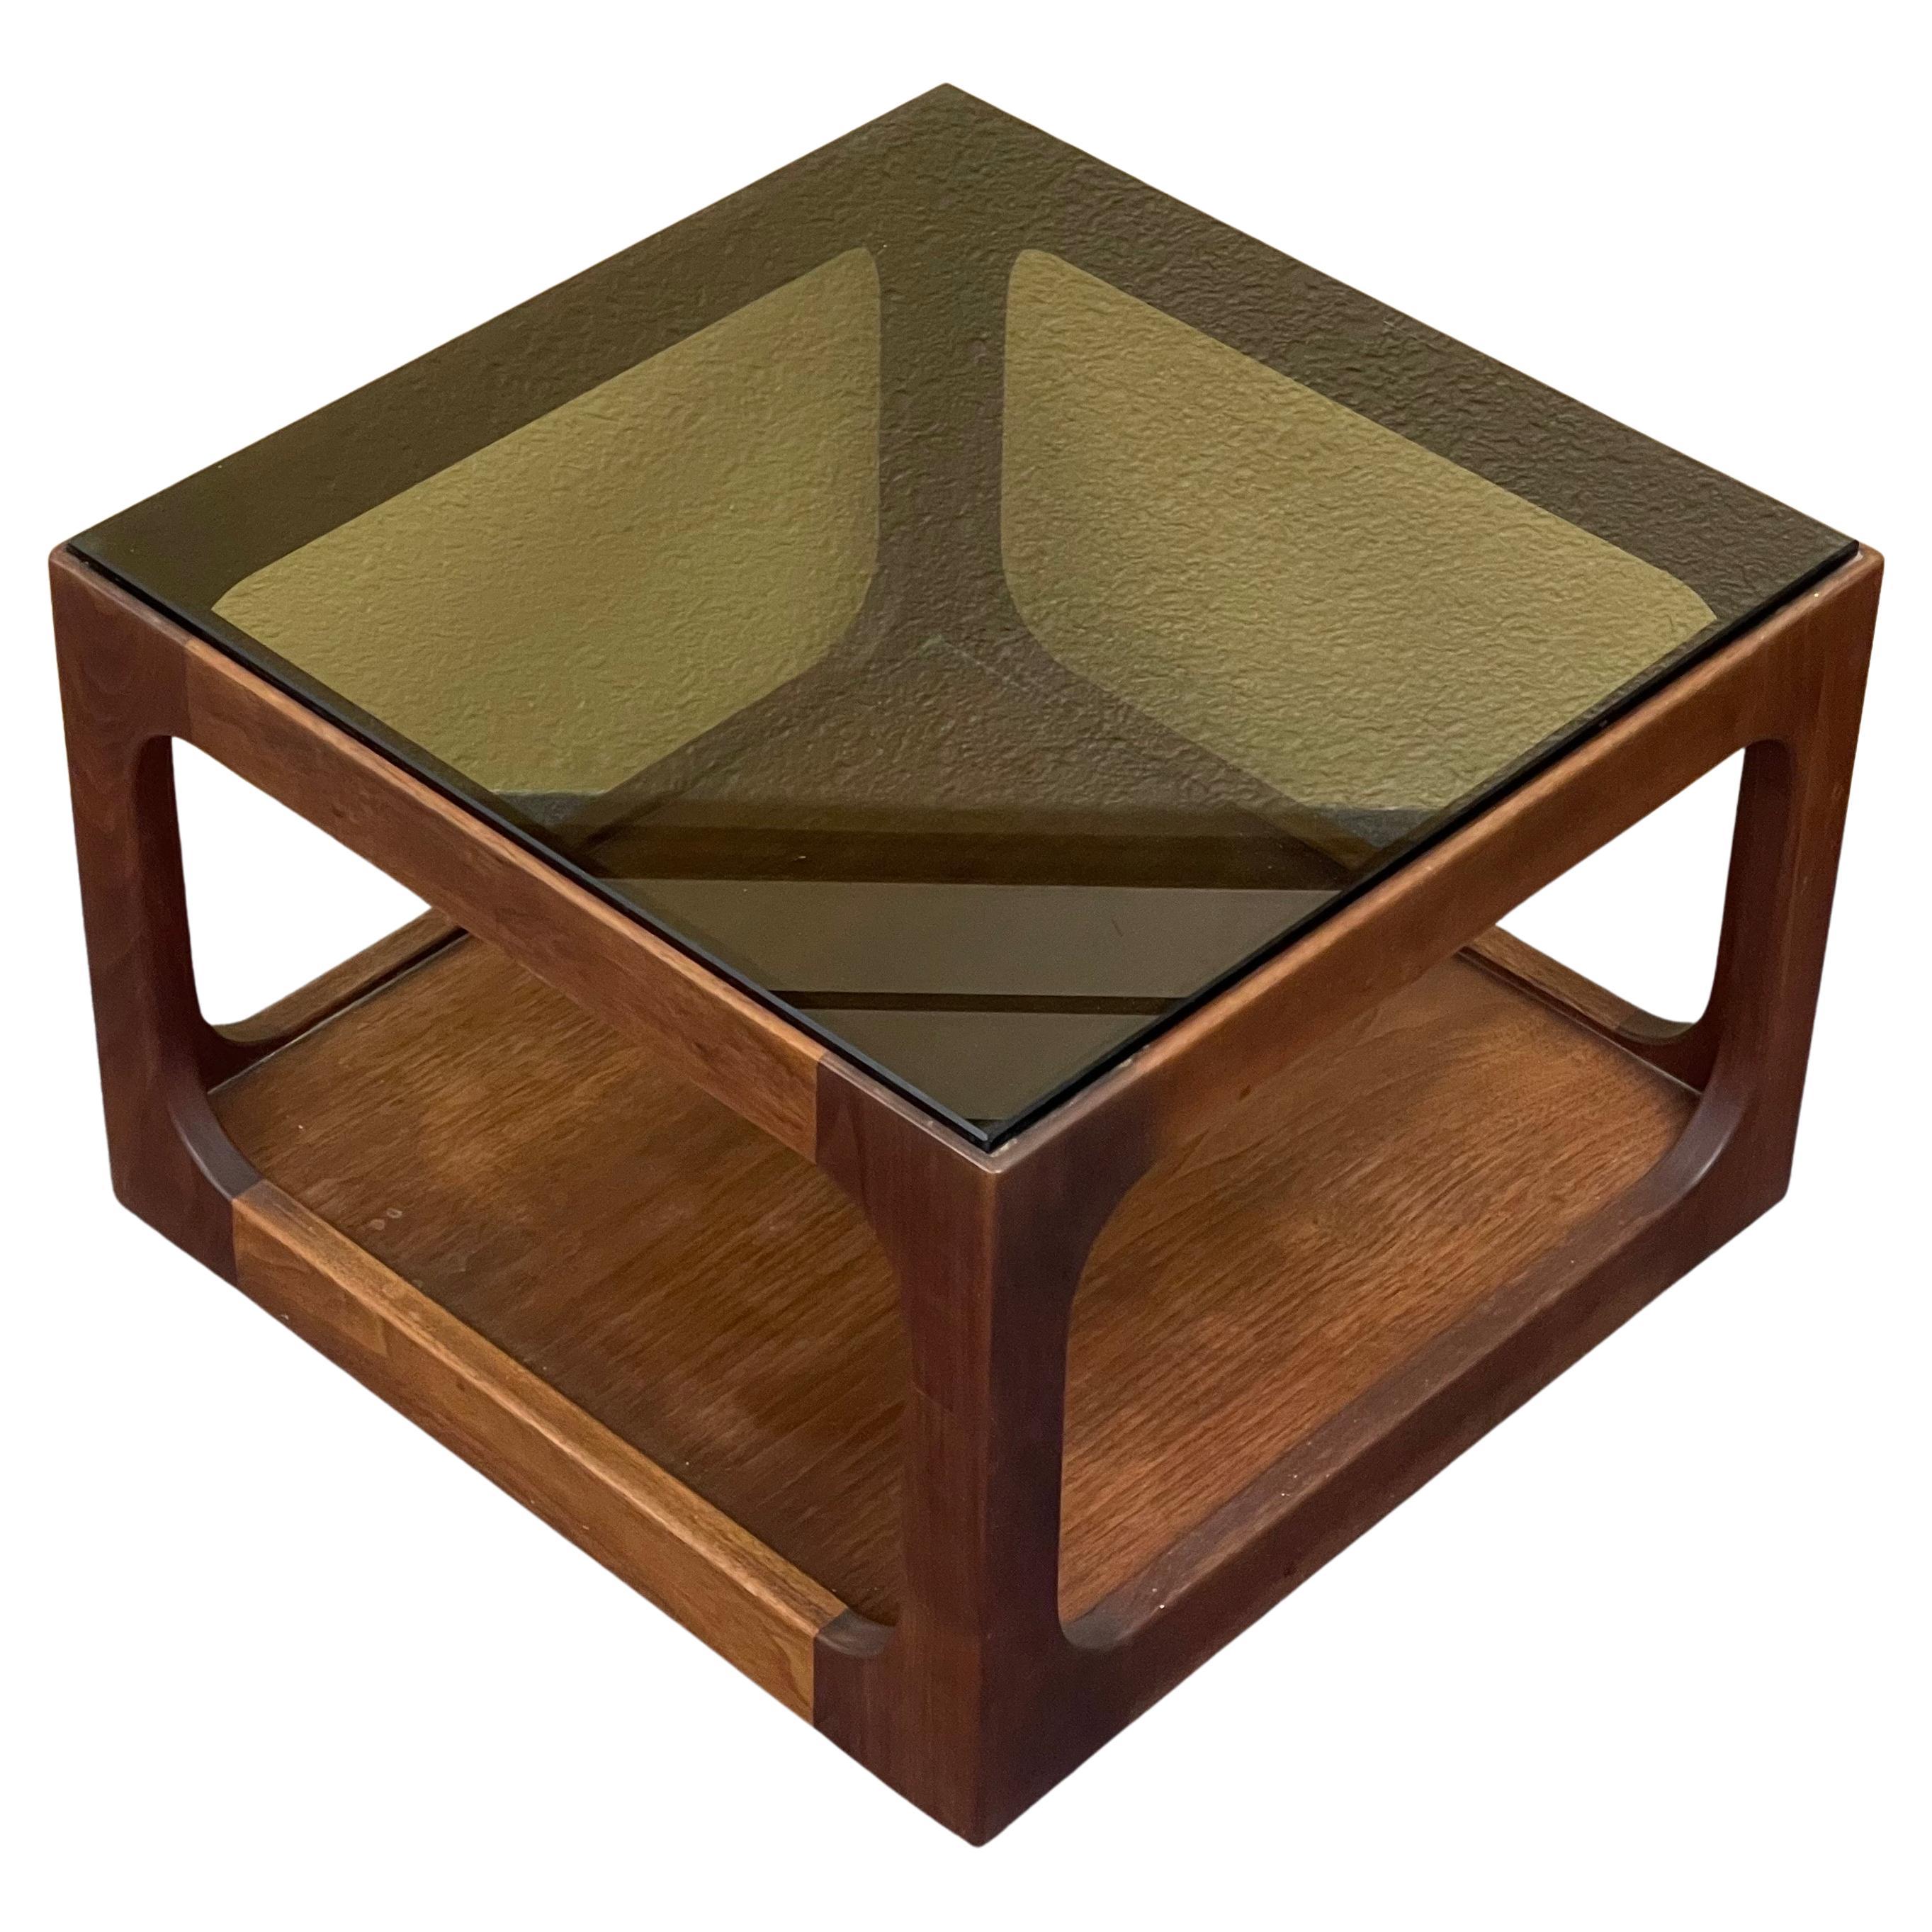 Single smoked glass end / accent table with walnut frame designed by John Keal for Brown Saltman, circa 1970s. The table is in very good vintage condition, measures 18